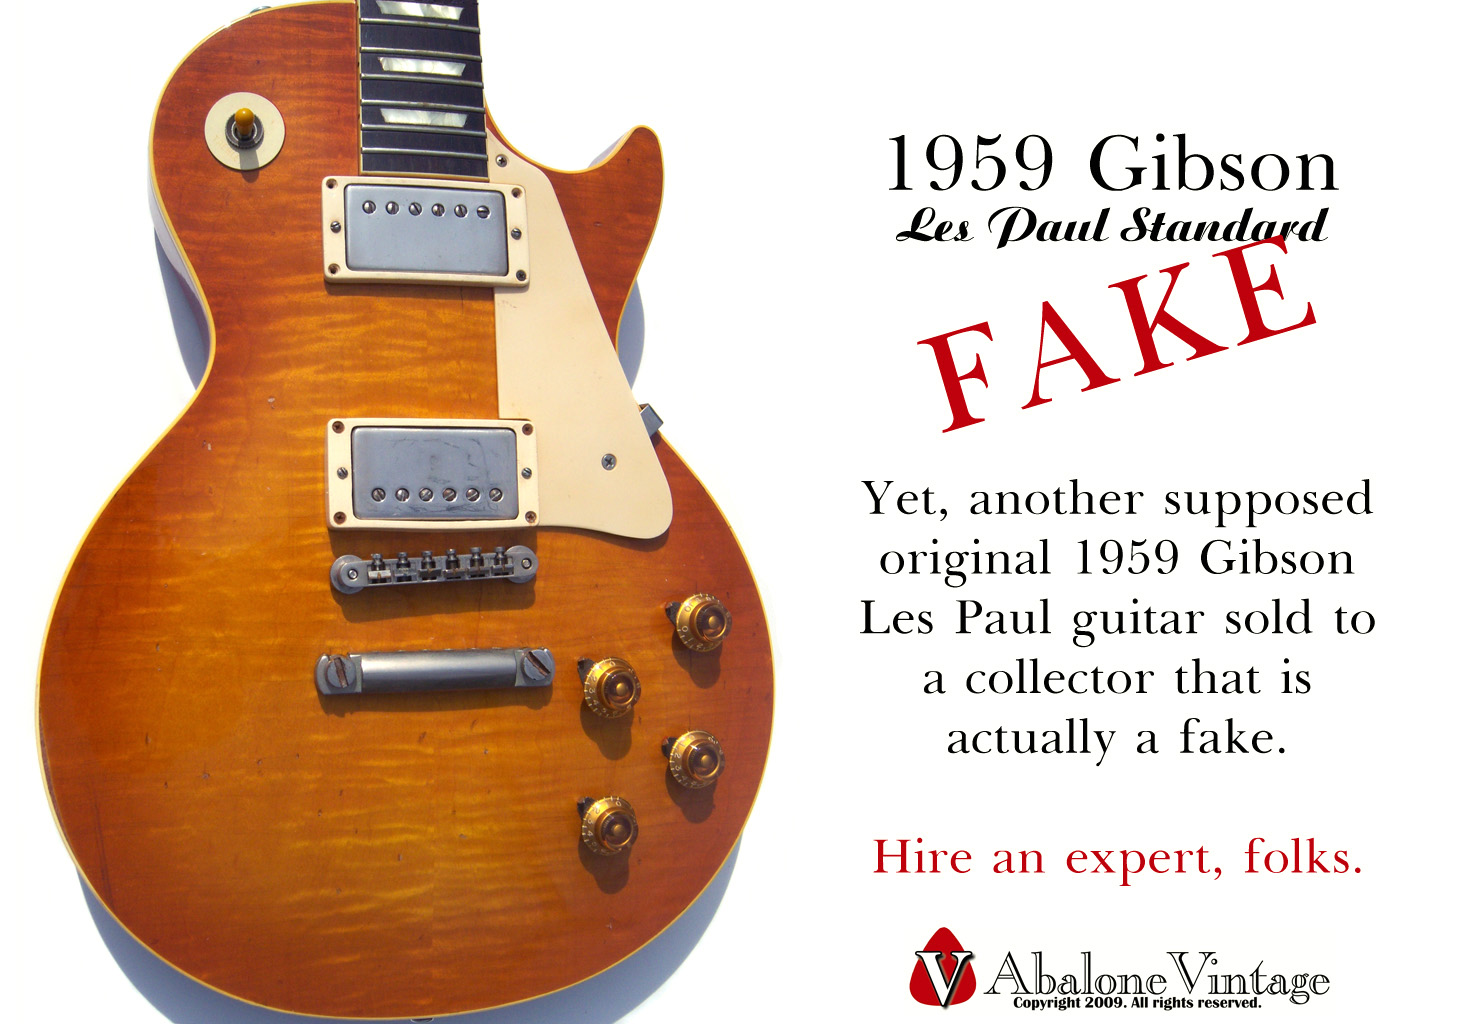 Fake 1959 Gibson Les Paul guitar Forgery replica les paul copy fake replica Gibson guitars hire an expert authentication specialist